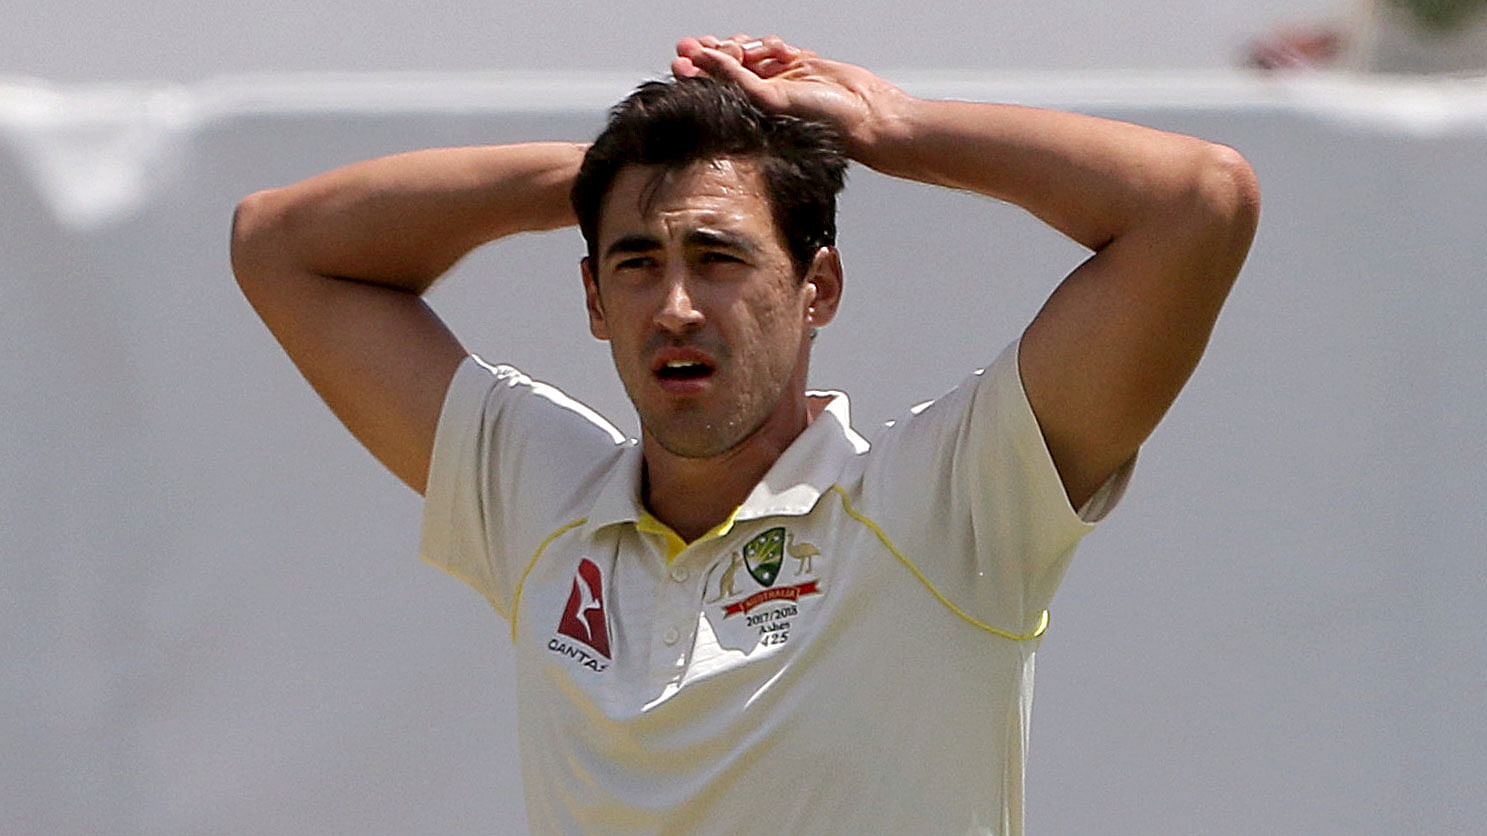  Mitchel Starc had a failed delivery during a tournament in South Africa after his injury. 